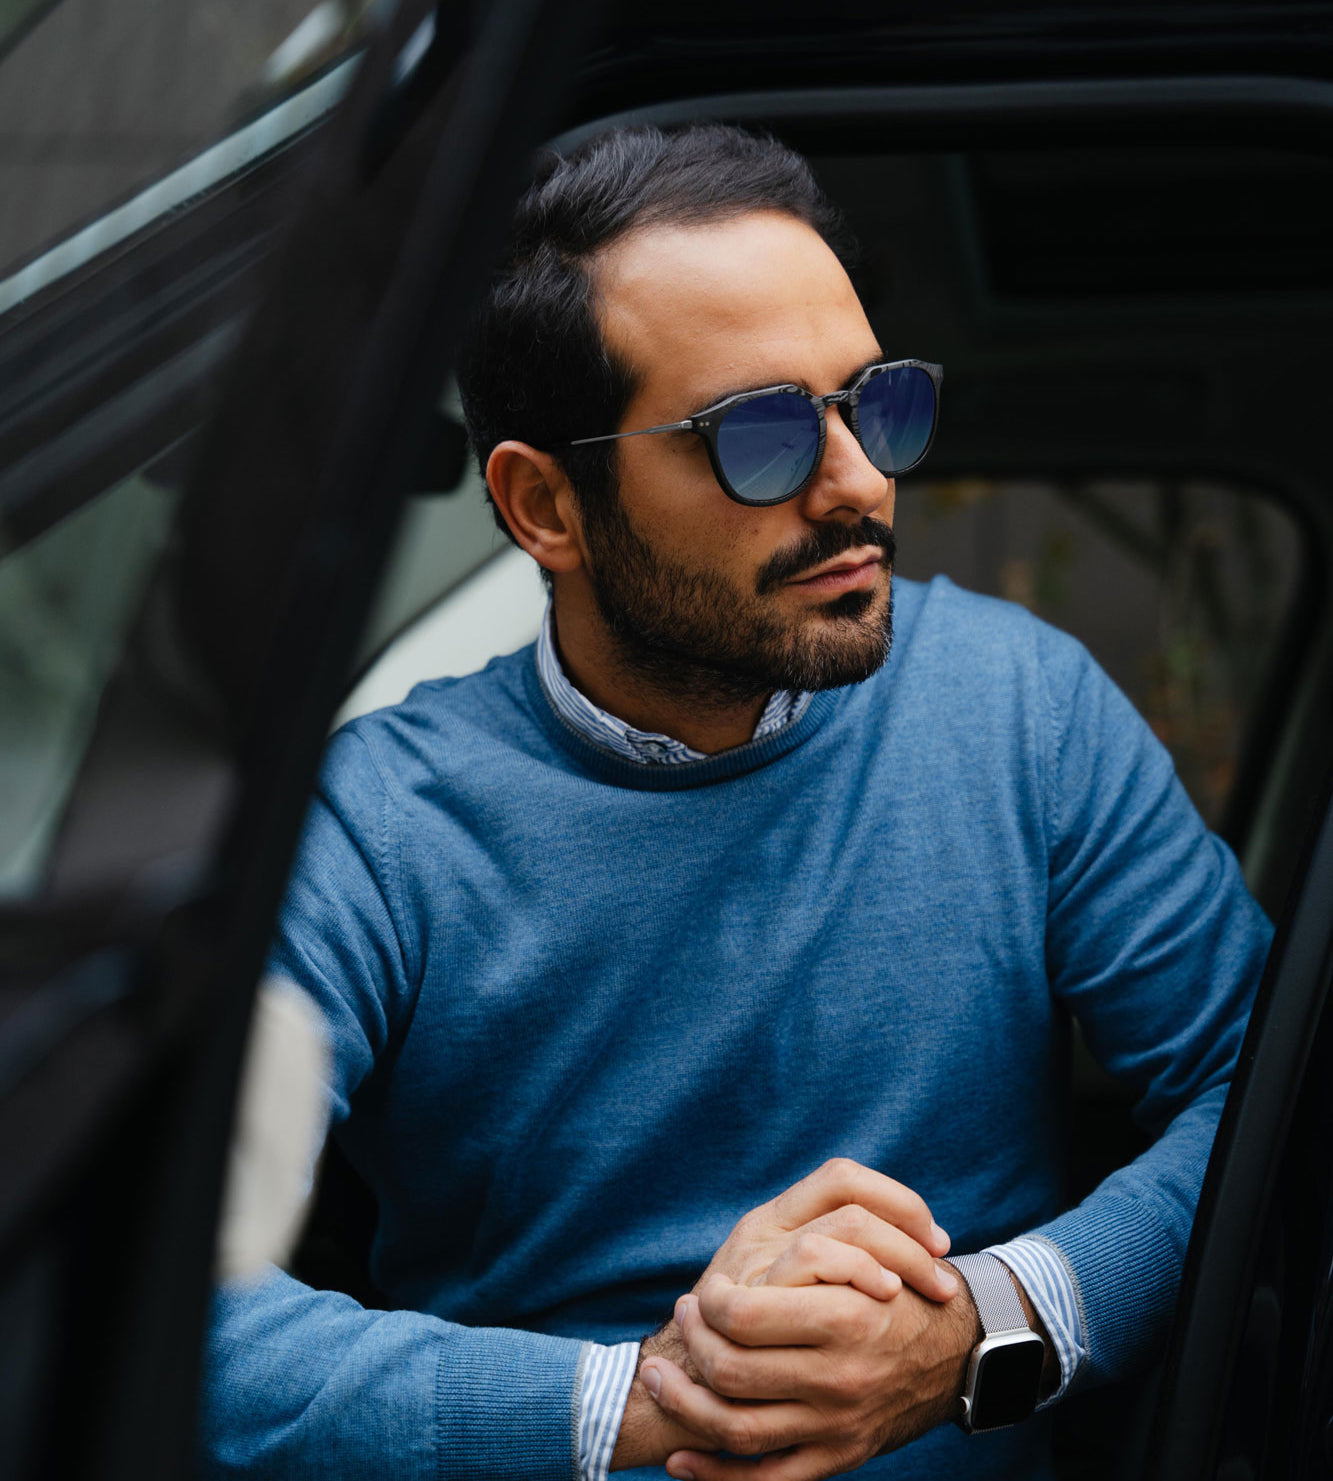 Andrea Mazzuca photoshoot for Roveri eyewear wearing the new CLM7 DEEP OCEAN in his Range Rover in Milan, Italy.